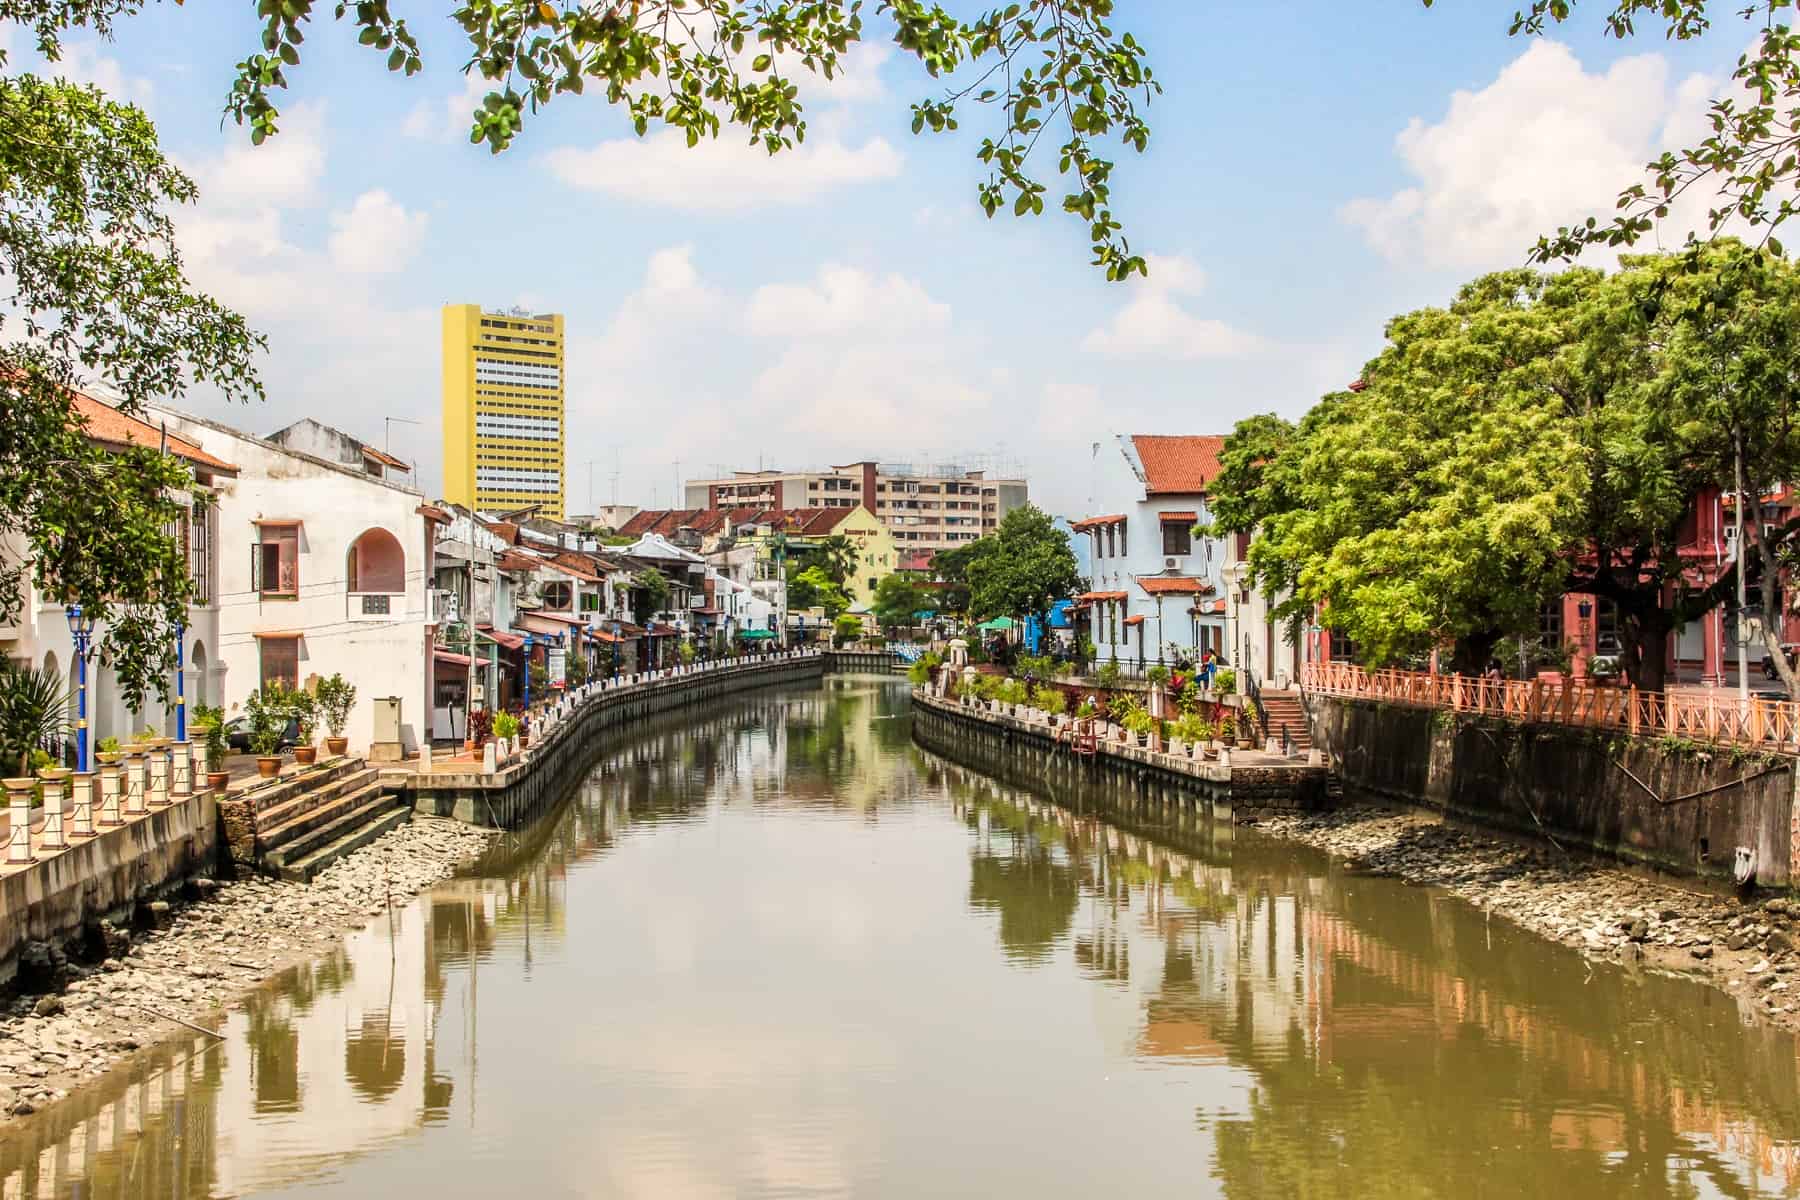 A view of the river in Melaka, Malaysia lined on either side with colonial style houses and trees